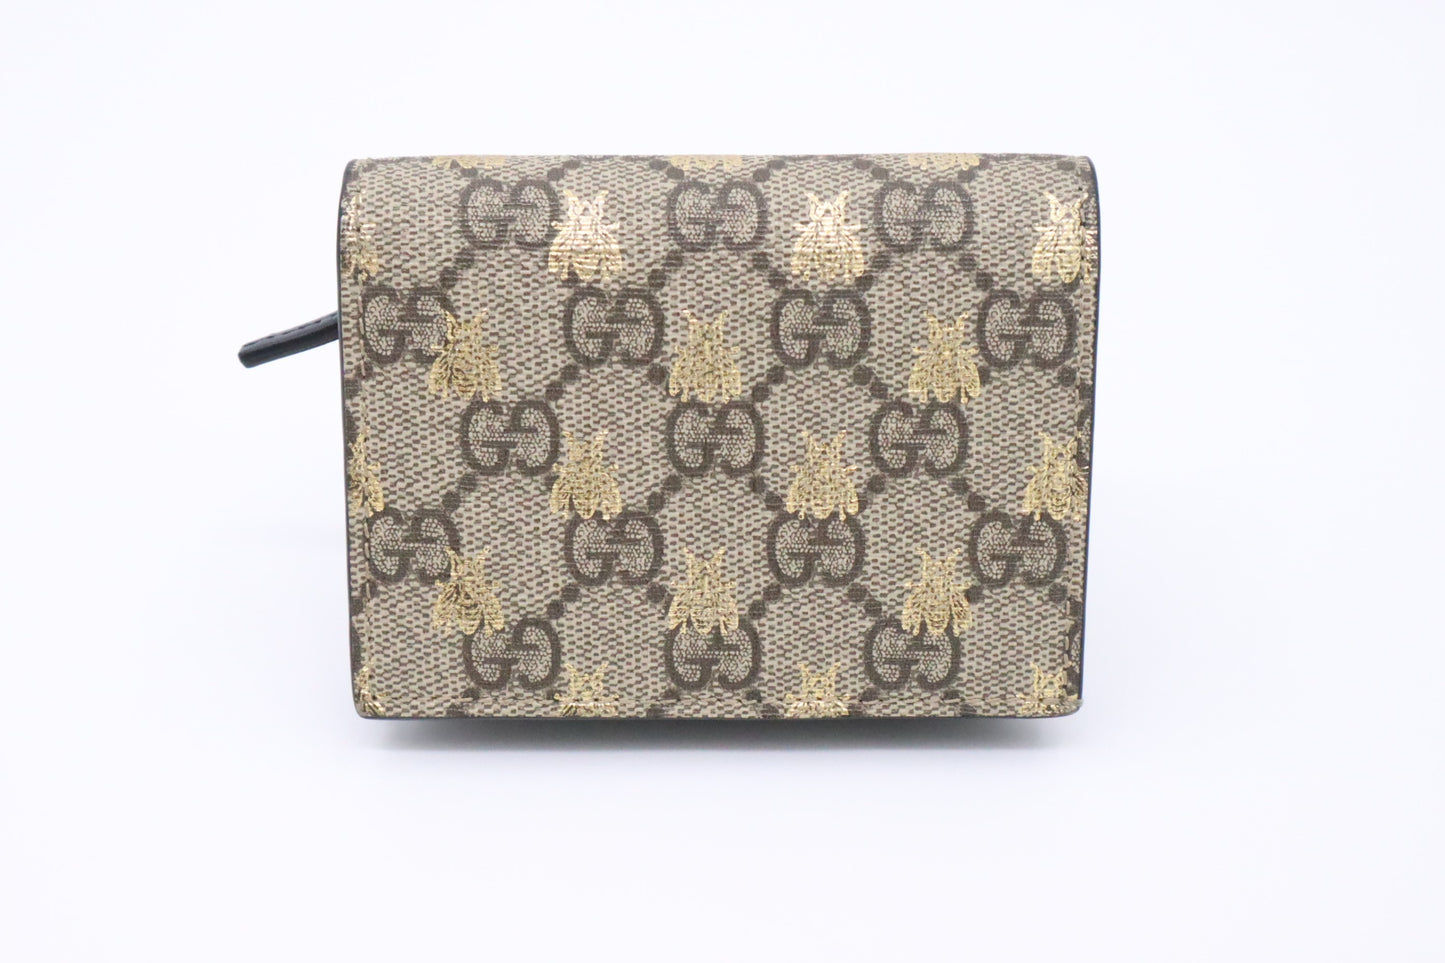 Gucci Bee Compact Wallet in GG Bee Canvas